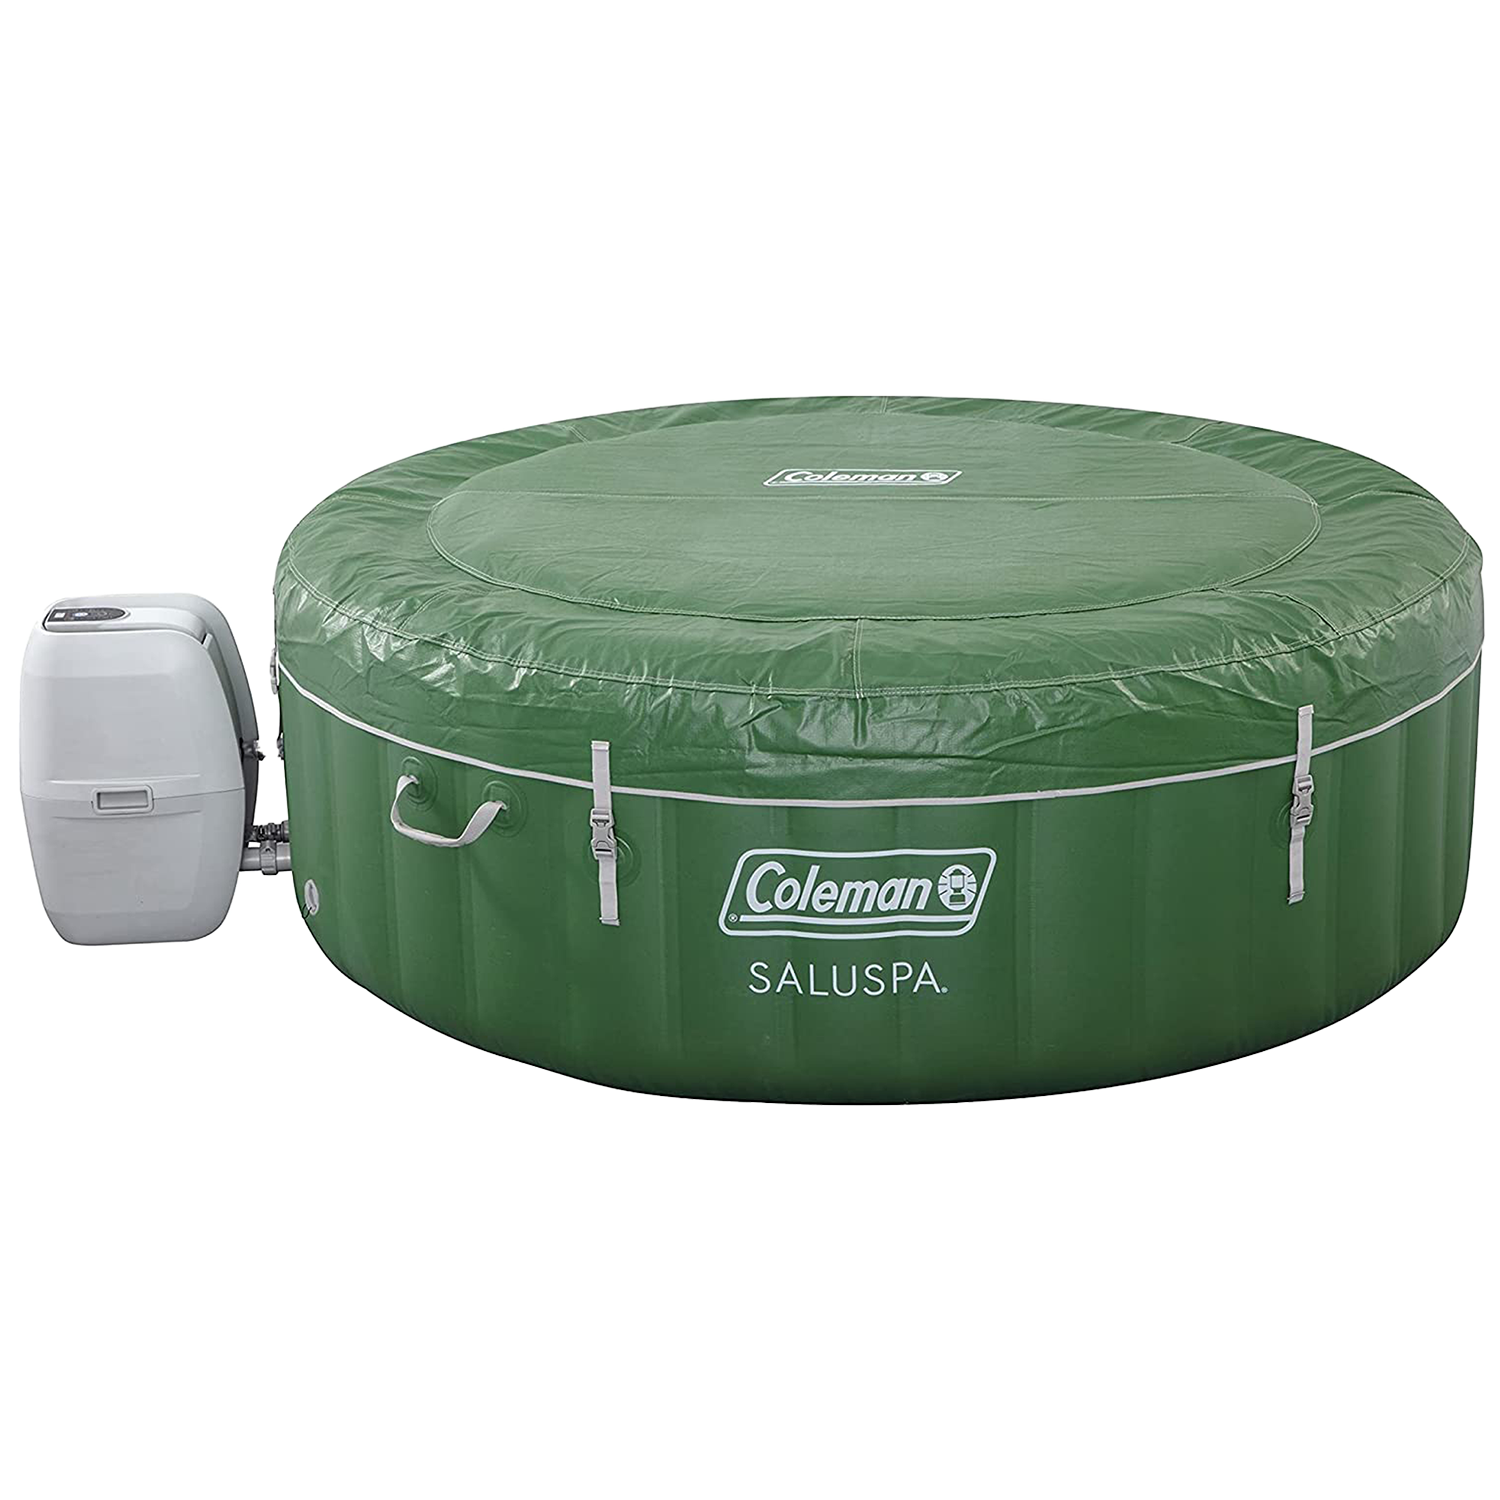 Coleman Green Inflatable Hot Tub.